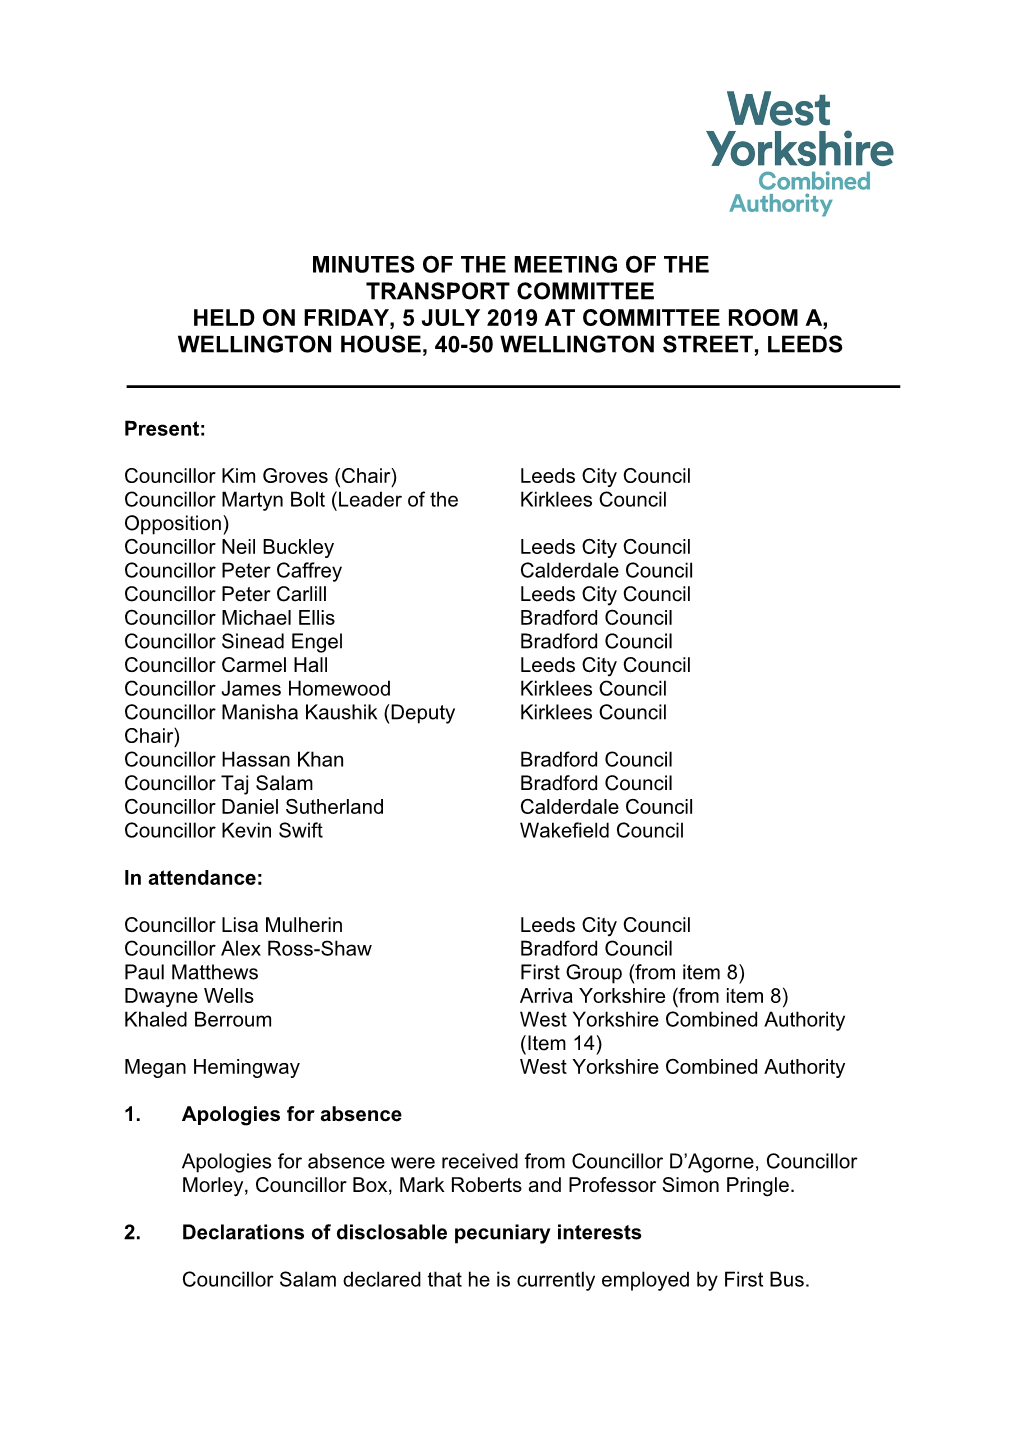 Minutes of the Meeting of the Transport Committee Held on Friday, 5 July 2019 at Committee Room A, Wellington House, 40-50 Wellington Street, Leeds